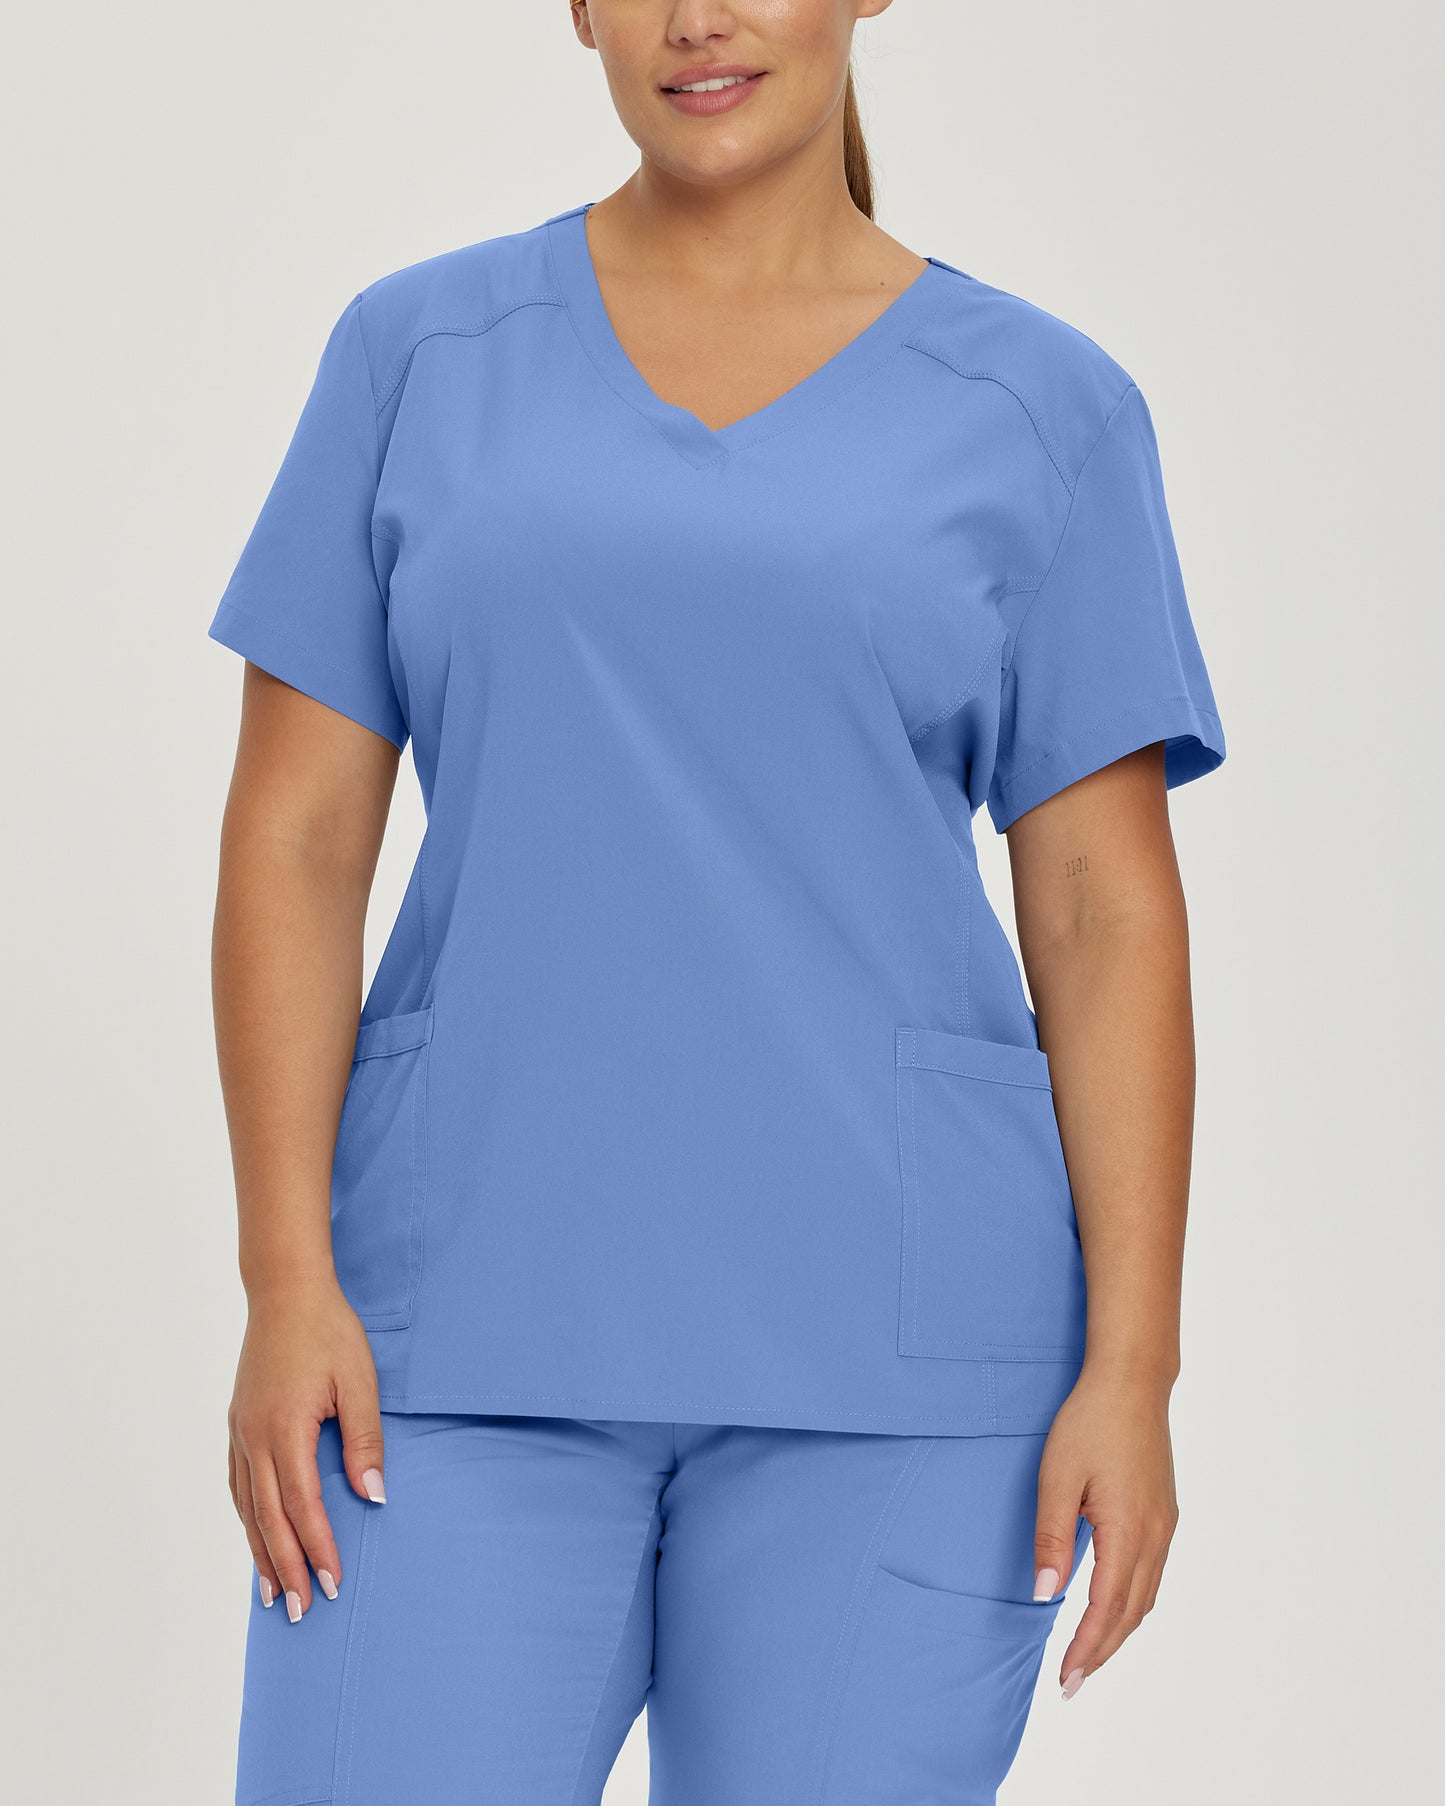 Women's V-neck top with two pockets - FIT - 785